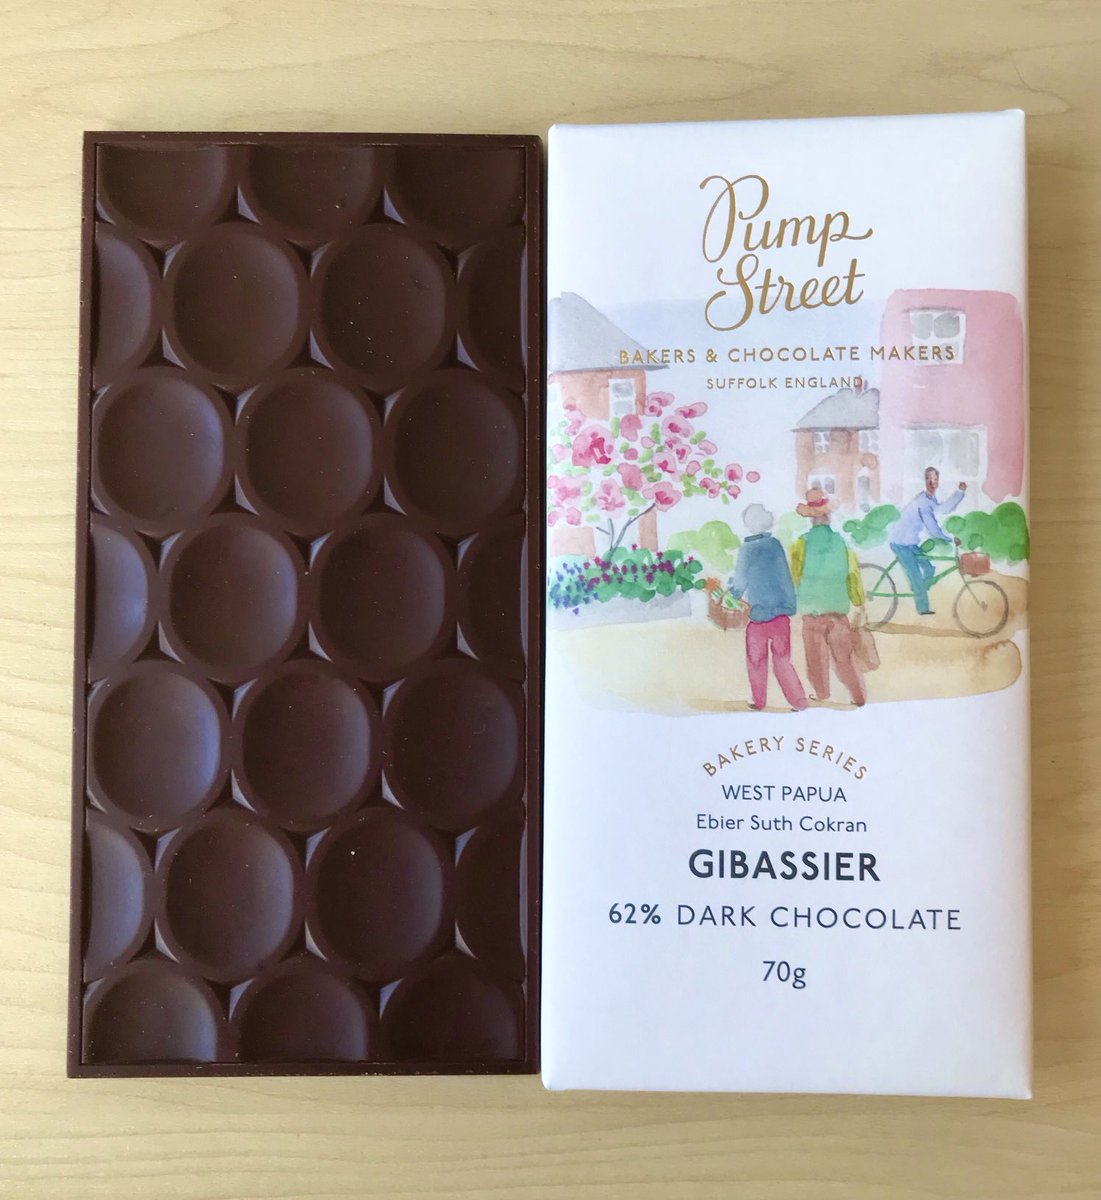 We are devouring with delight this new bar in the Bakery Series from ⁦@pumpstchocolate⁩ which combines dark chocolate from West Papua with subtle flavours of aniseed and orange peel, as found in the Gibassier pastry of Provence. Gorgeous